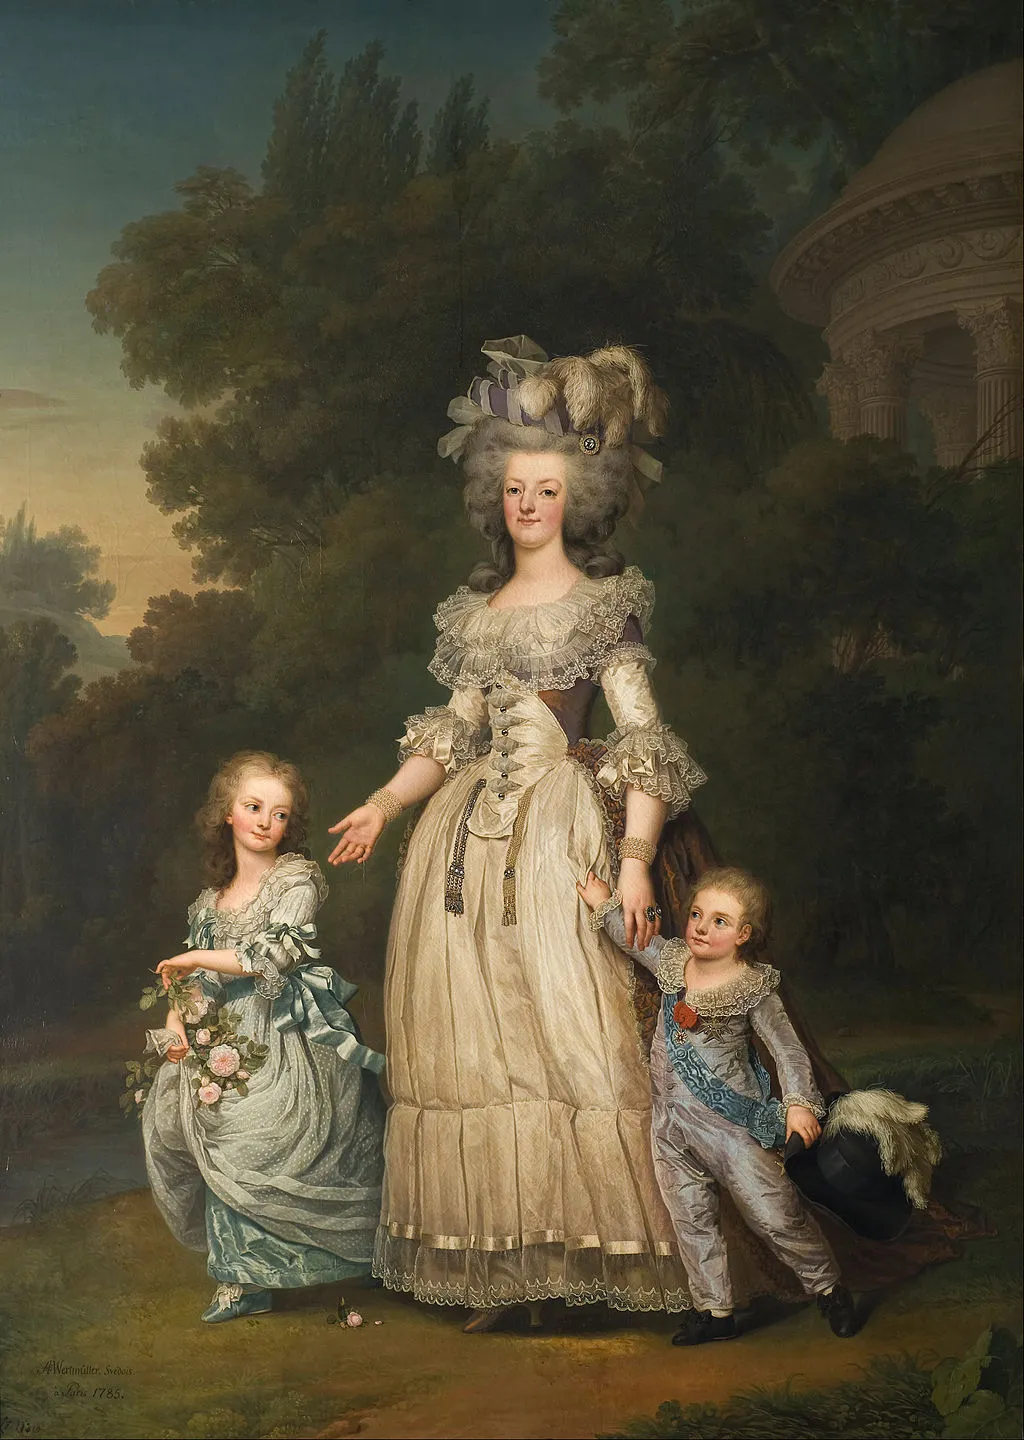 A 1785 portrait of Marie Antoinette and two of her children walking on the grounds of Petit Trianon